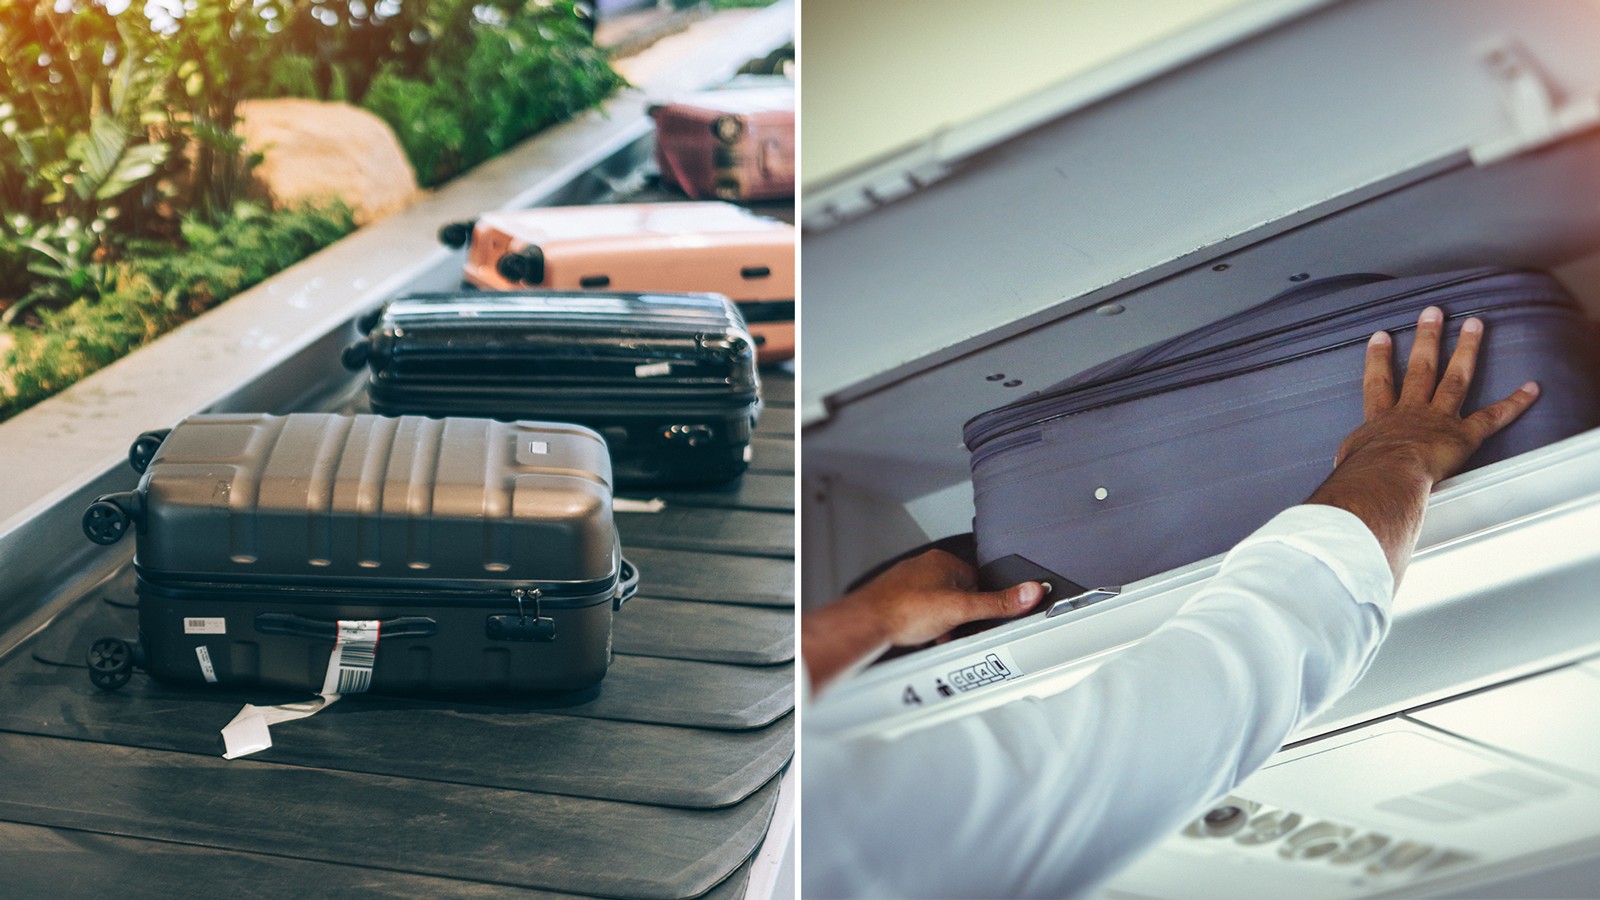 When you're checking bags expensive luggage doesn't make sense so save  yourself the money!